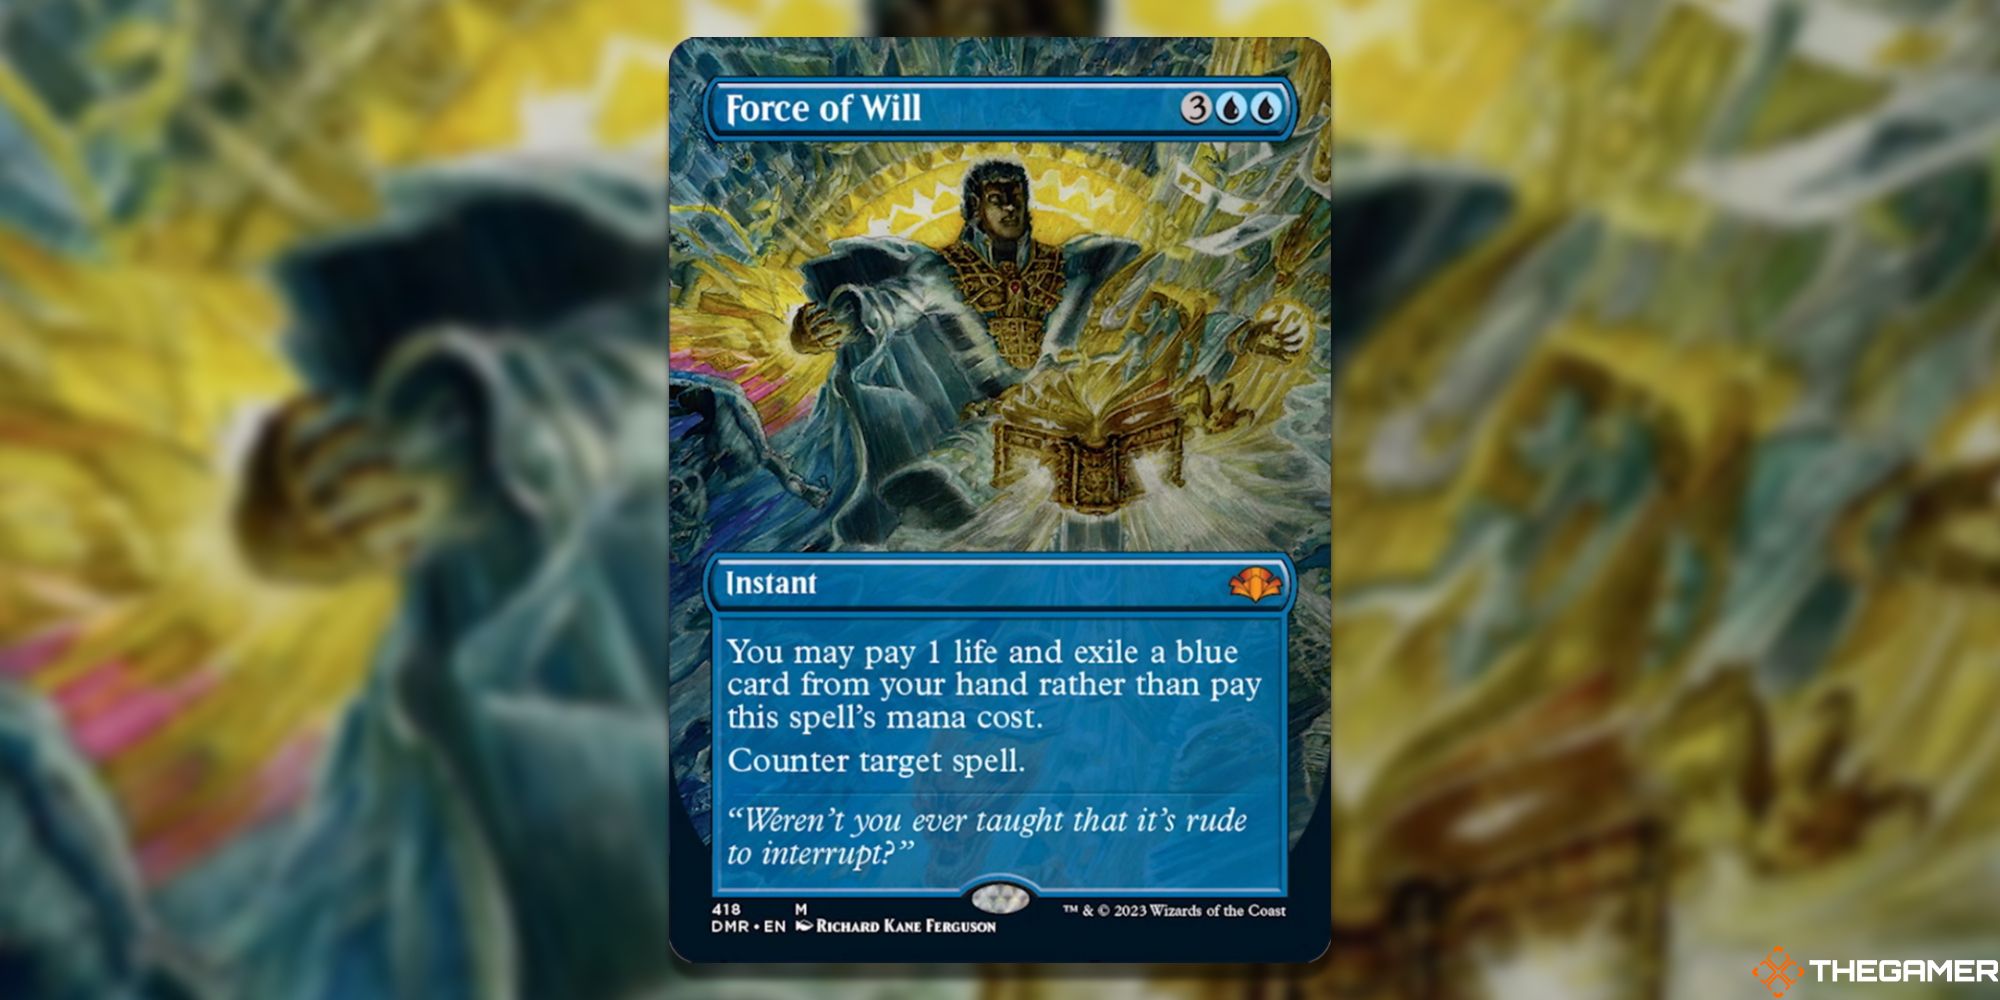  Image of the Force of Will Borderless card in Magic: The Gathering, with art by Richard Kane Ferguson